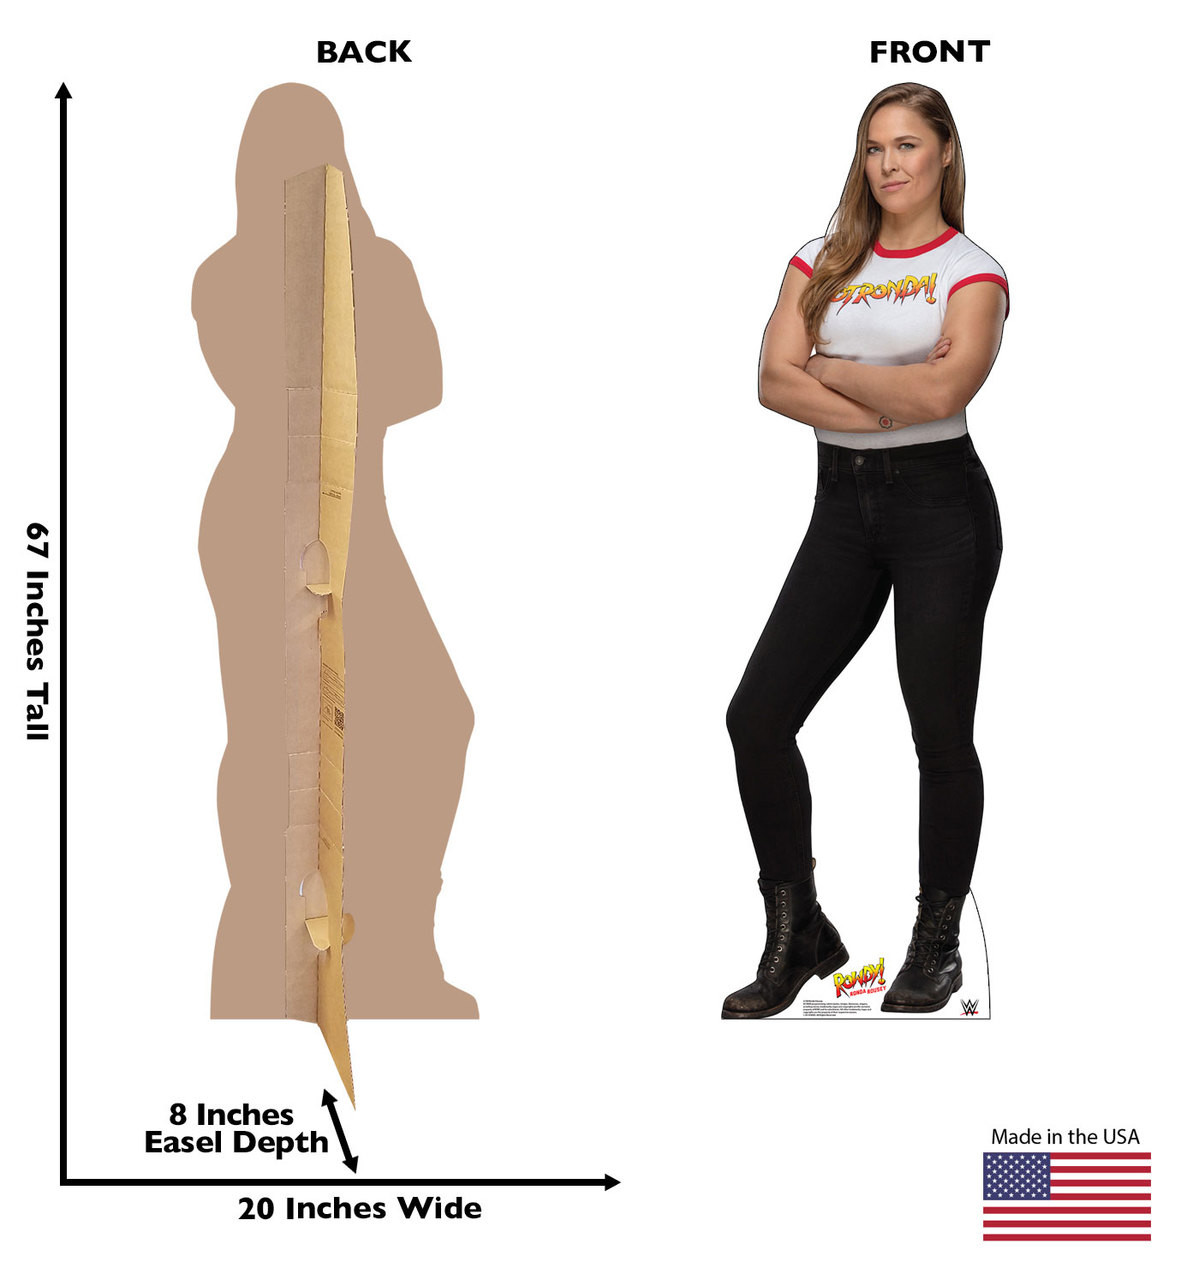 Ronda Rousey Life-size cardboard standee front and back with dimensions.